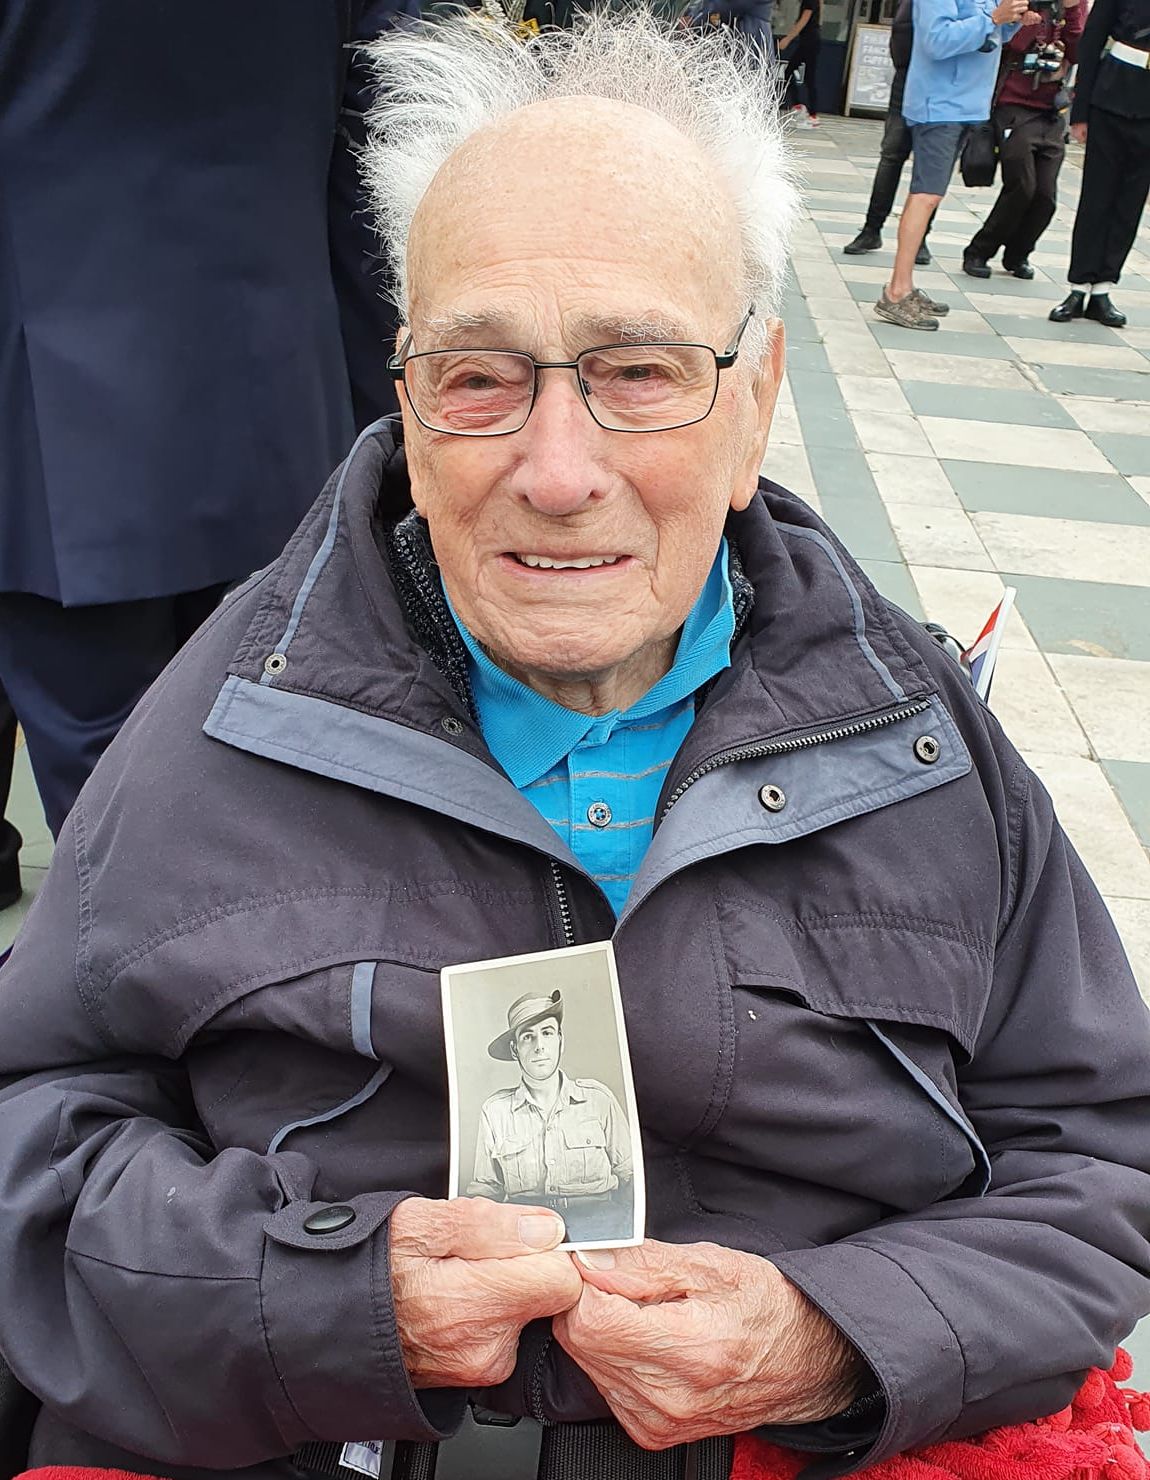 This photo of former Royal Marine Richard Howard at Southport Armed Forces Day was taken by Carol Jamieson. She said: "My Dad he will be 100, in October he really enjoyed it." He was in the Royal Marines spent a lot of time in Italy and Singapore. This photo shows him holding a phoot of himself when he was in Singapore in 1945